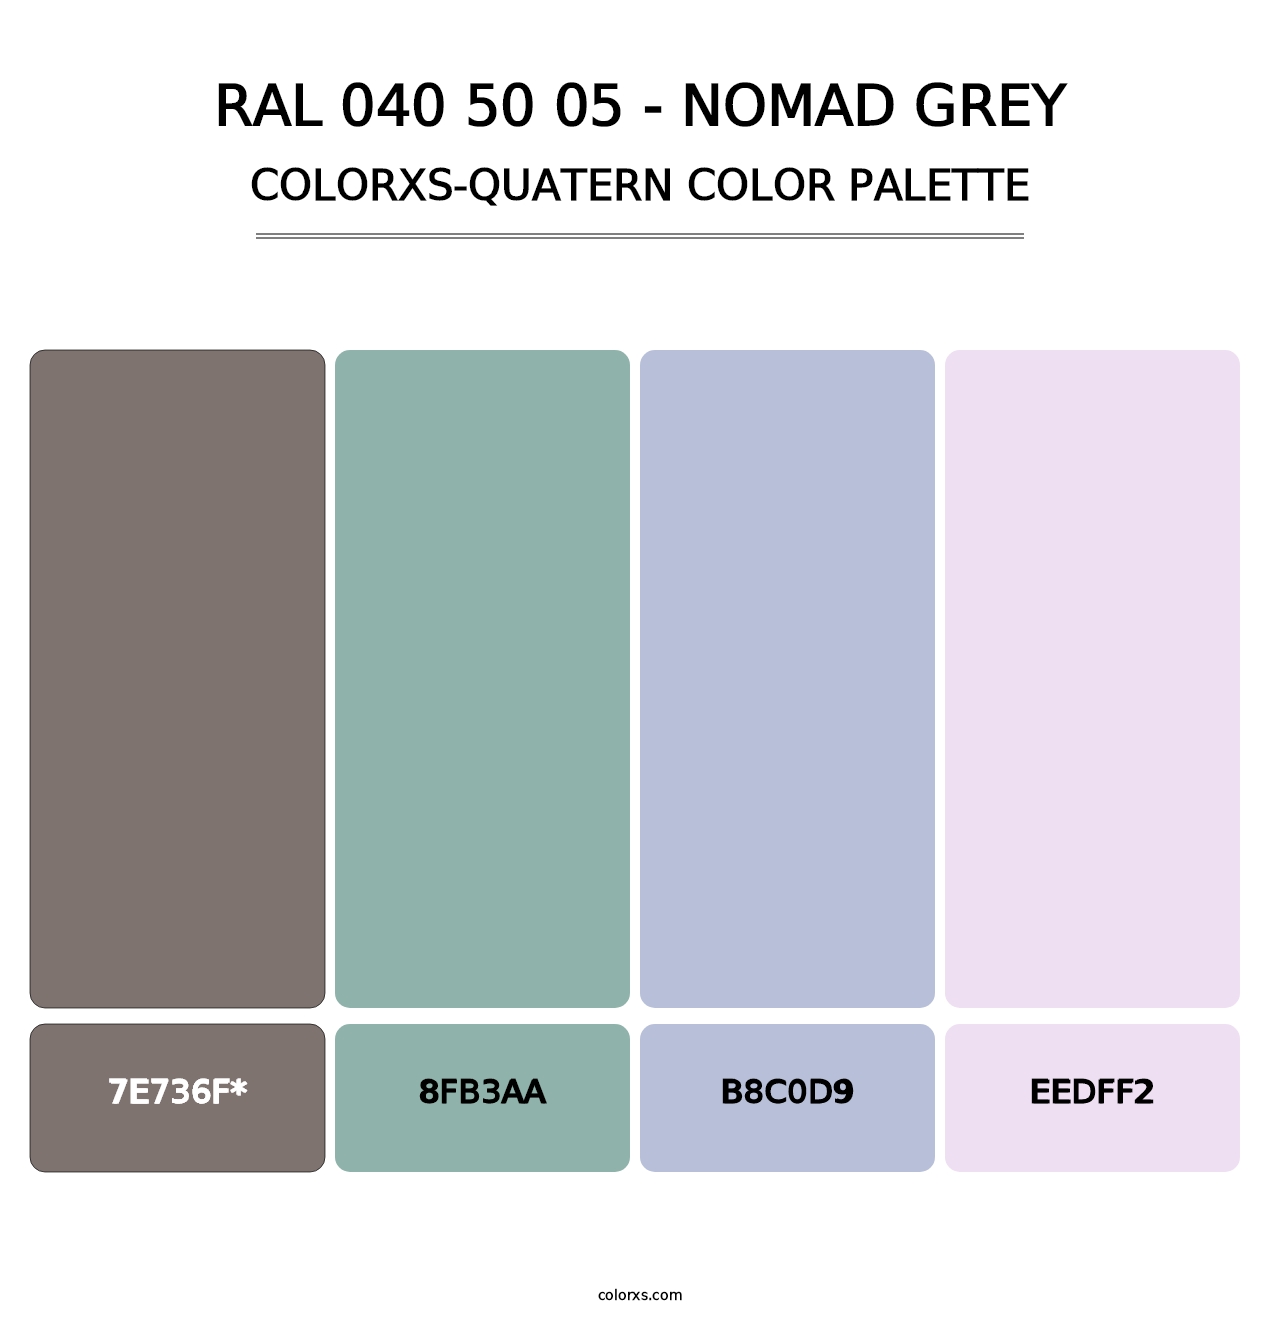 RAL 040 50 05 - Nomad Grey - Colorxs Quatern Palette